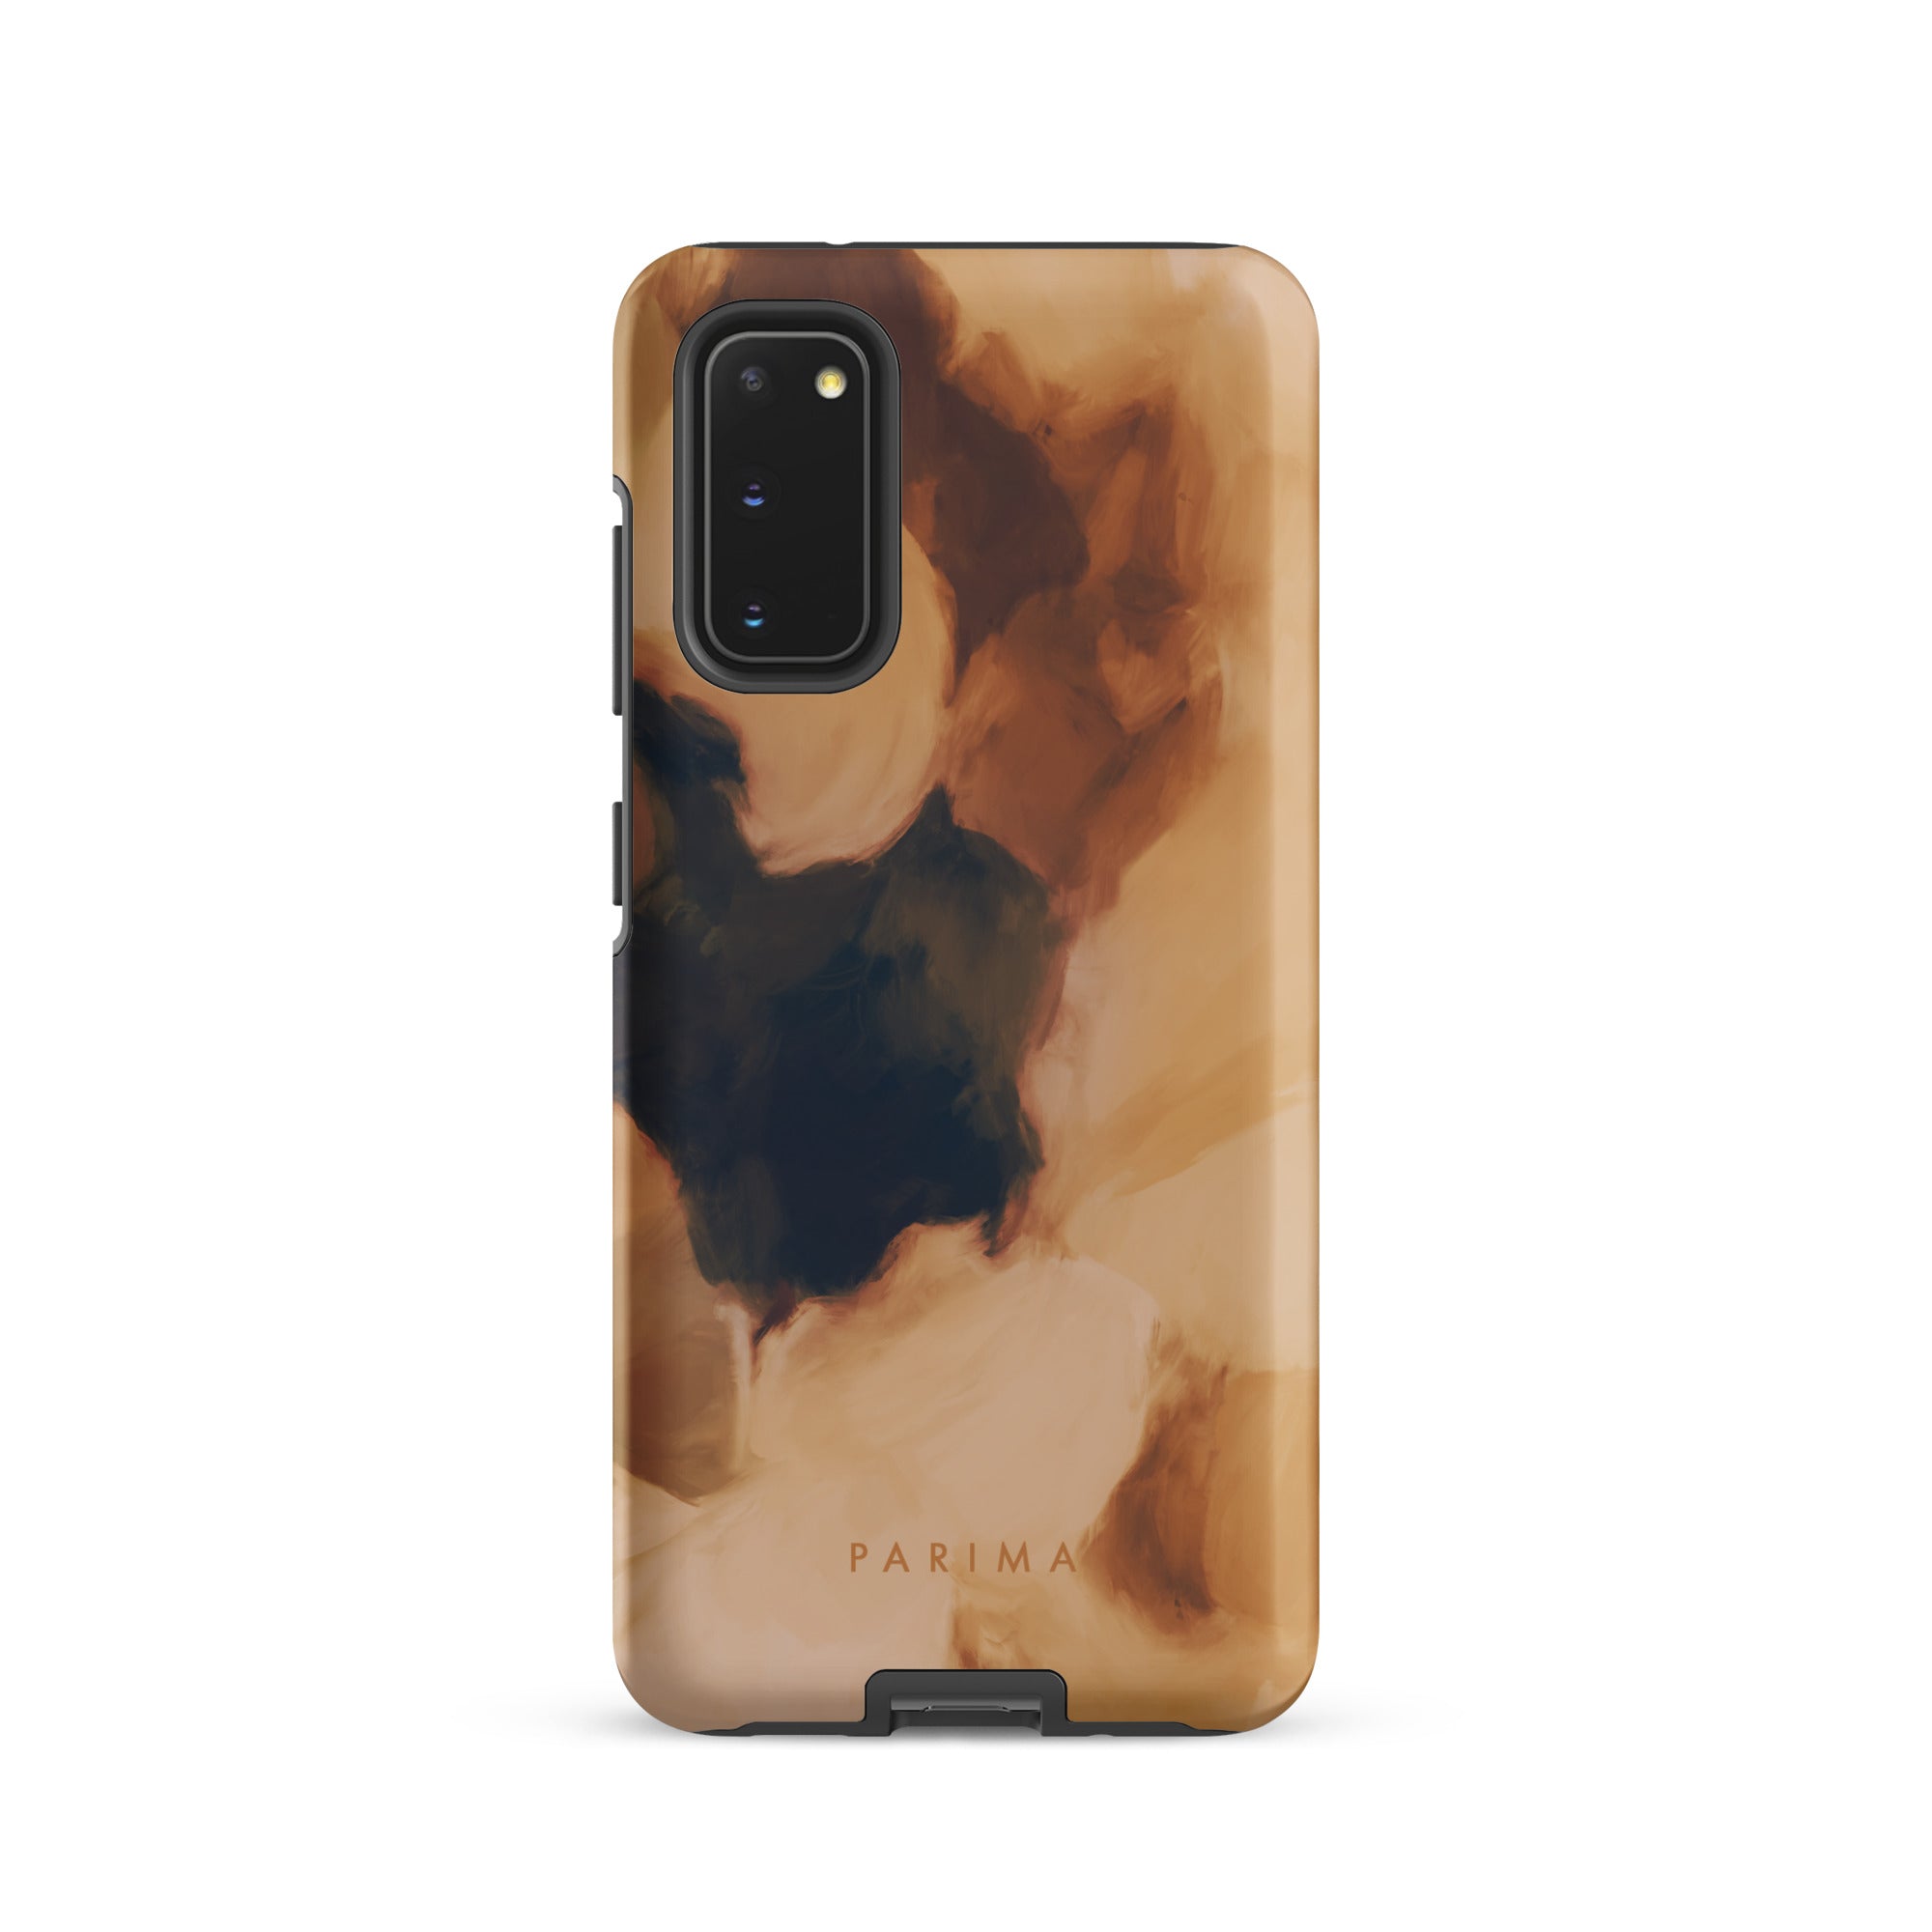 Clay, brown and tan color abstract art on Samsung Galaxy s20 tough case by Parima Studio